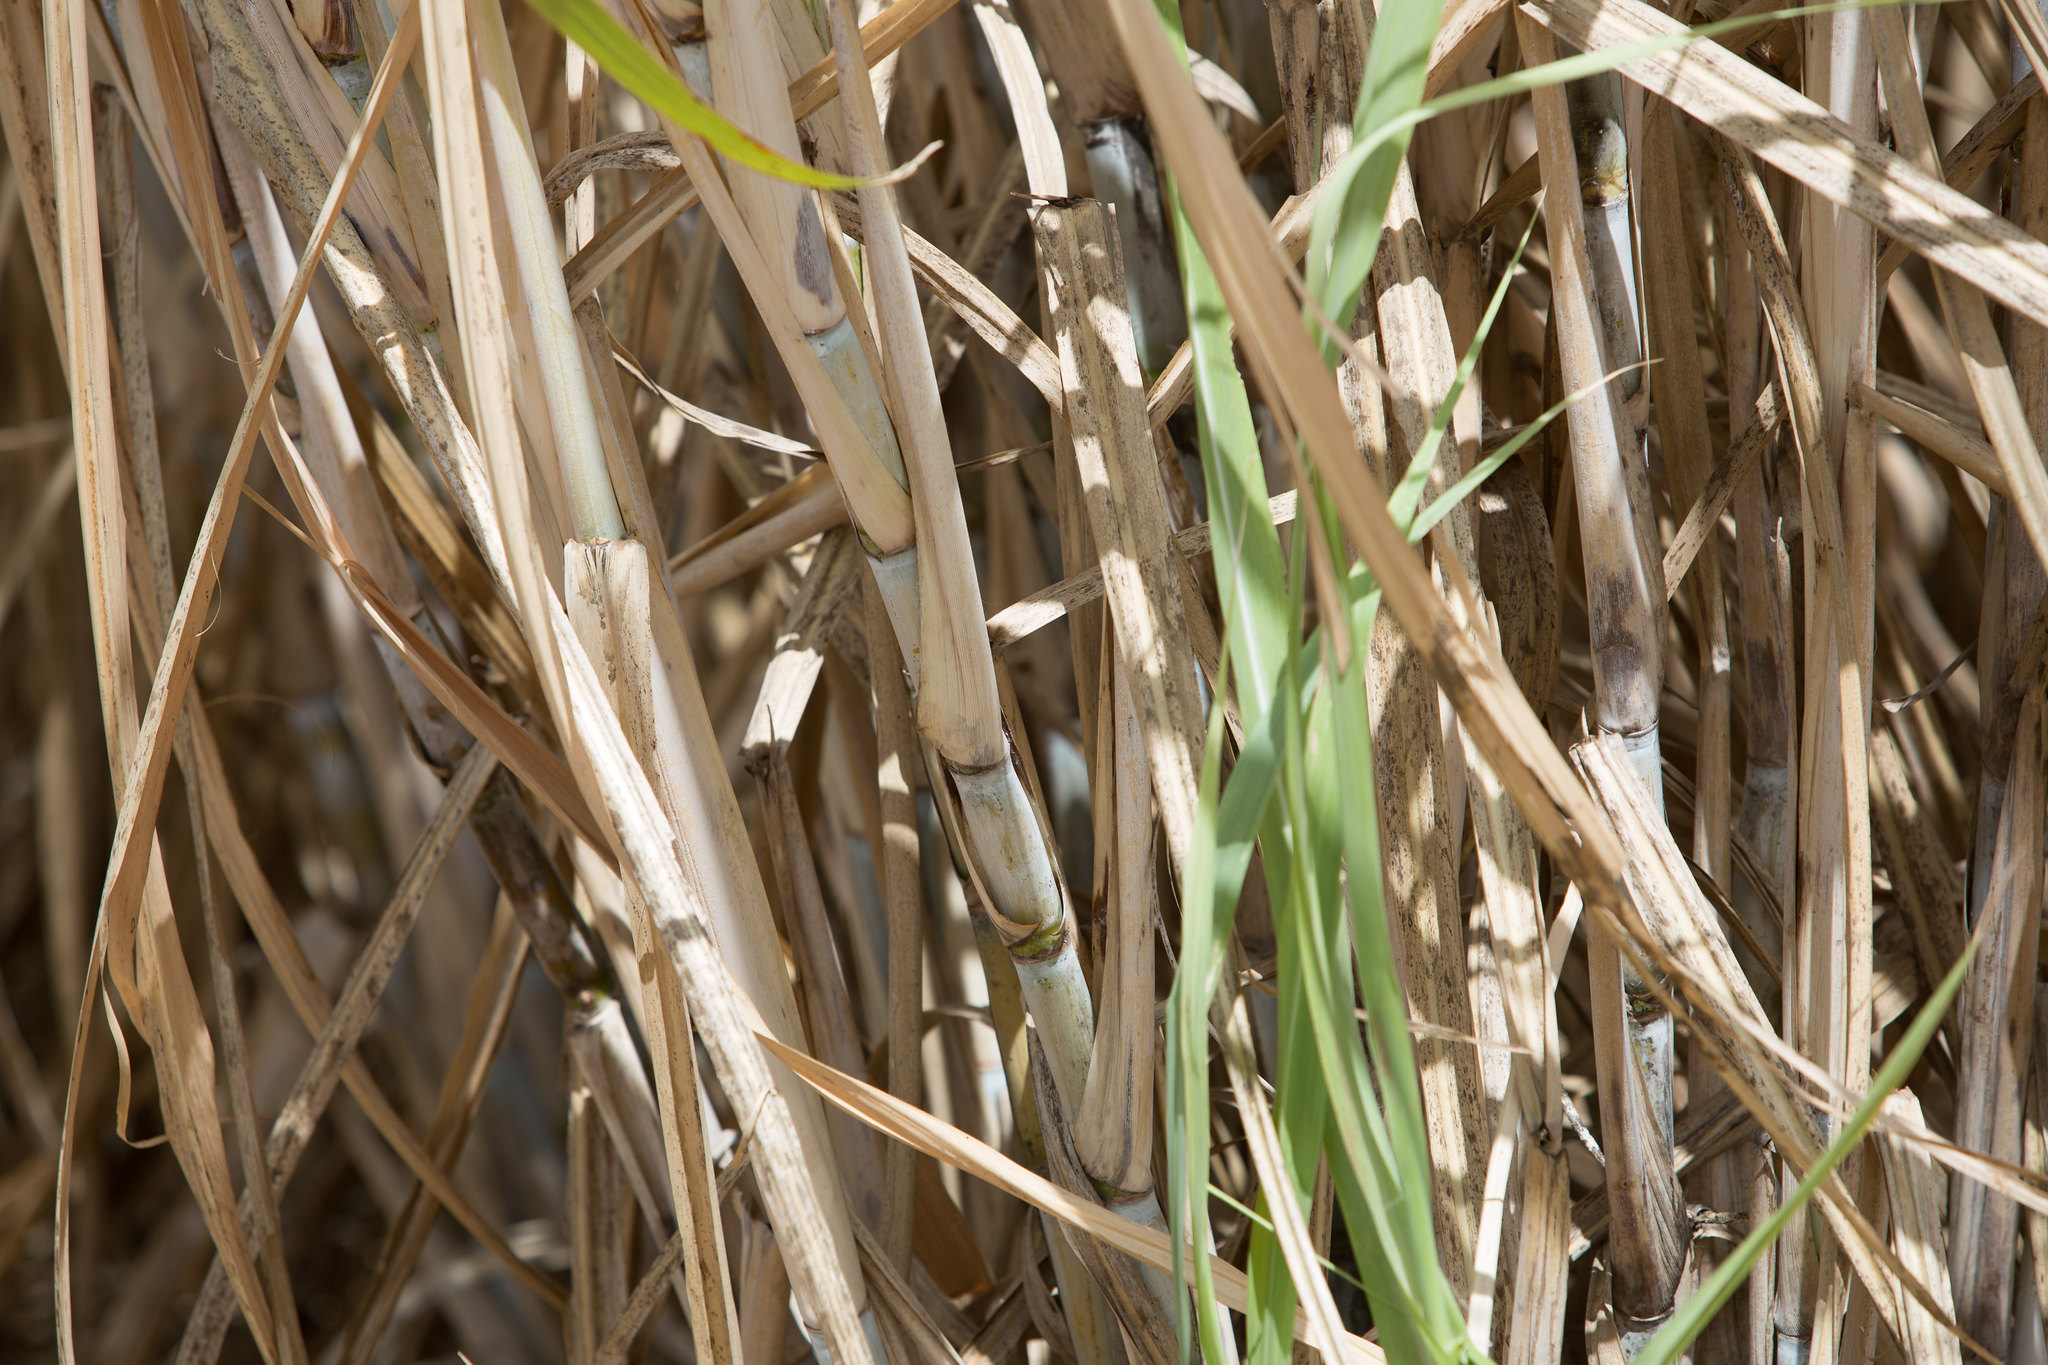 Drip irrigation makes it possible to standardize the availability of sugarcane in the industry throughout the harvest